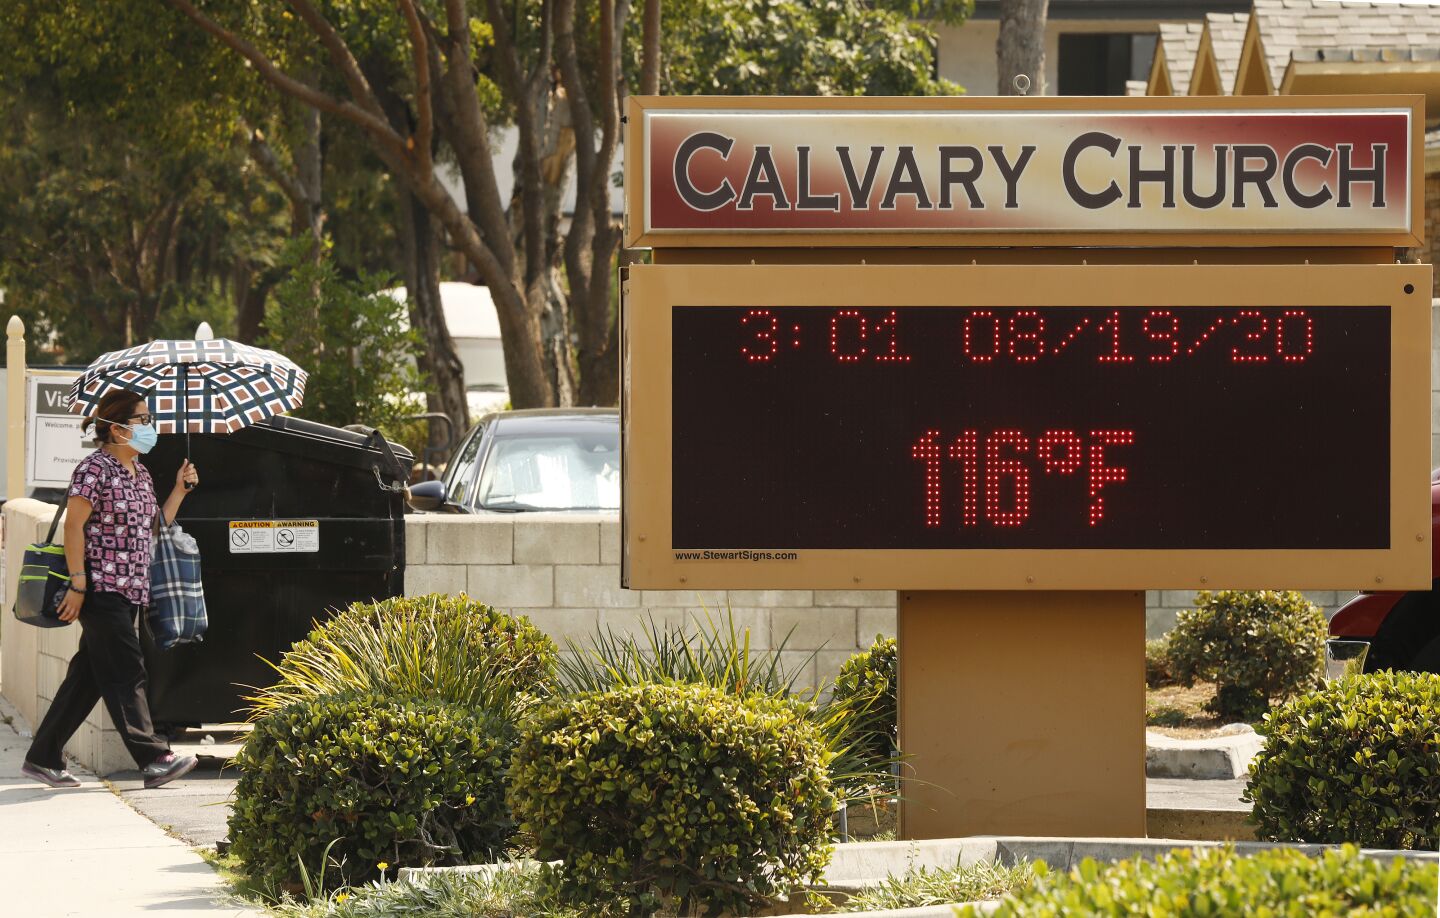 The thermometer at Calvary Church in Woodland Hills registers 116 degrees.